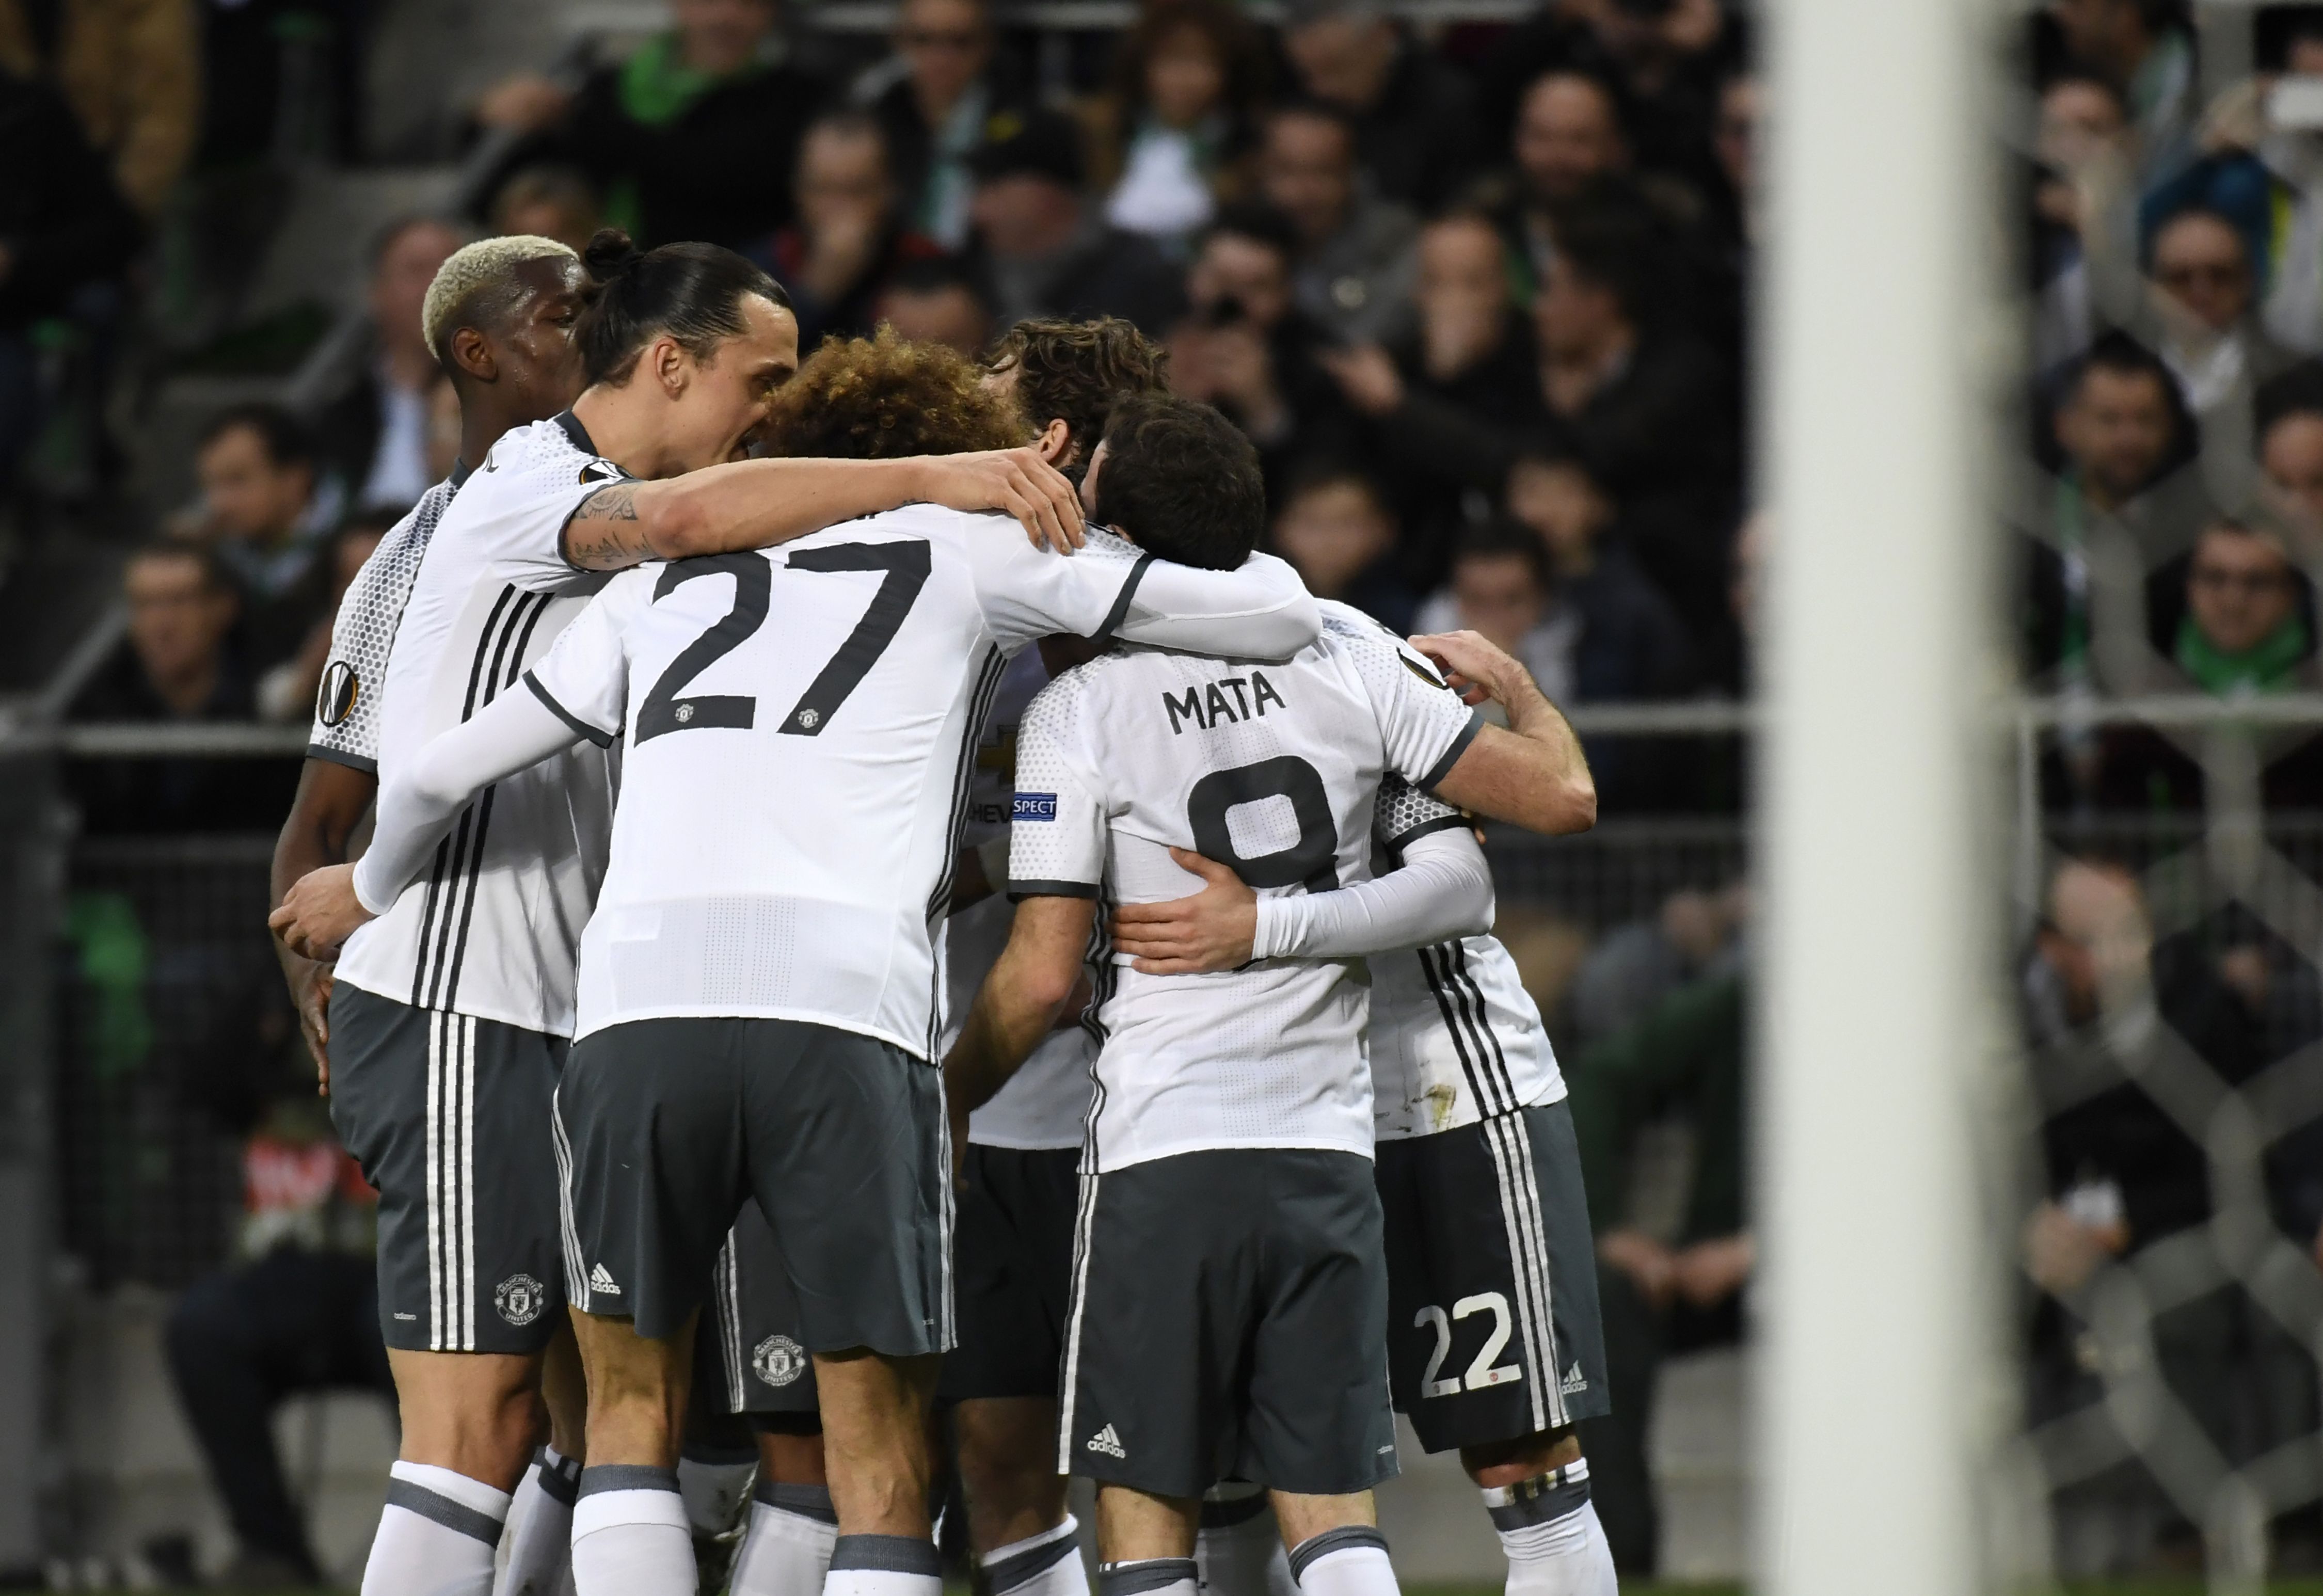 Manchester's United's Armenian forward Henrikh Mkhitaryan celebrates with teammates after scoring a goal during the UEFA Europa League football match between AS Saint-Etienne and Manchester United on February 22, 2017, at the Geoffroy Guichard stadium in Saint-Etienne, central France. / AFP / PHILIPPE DESMAZES        (Photo credit should read PHILIPPE DESMAZES/AFP/Getty Images)